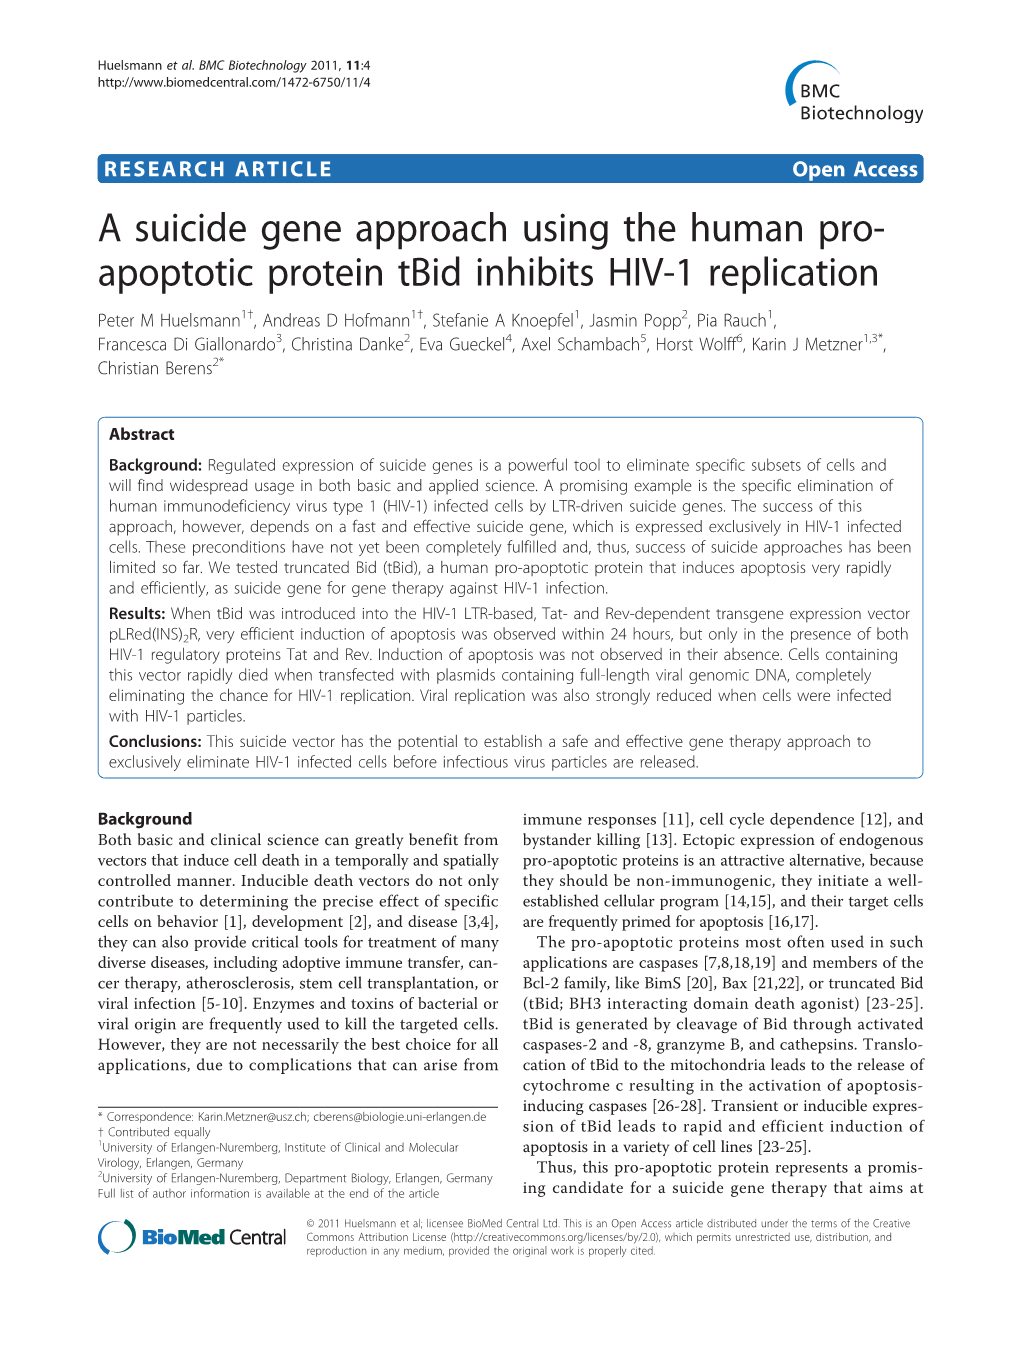 A Suicide Gene Approach Using the Human Pro- Apoptotic Protein Tbid